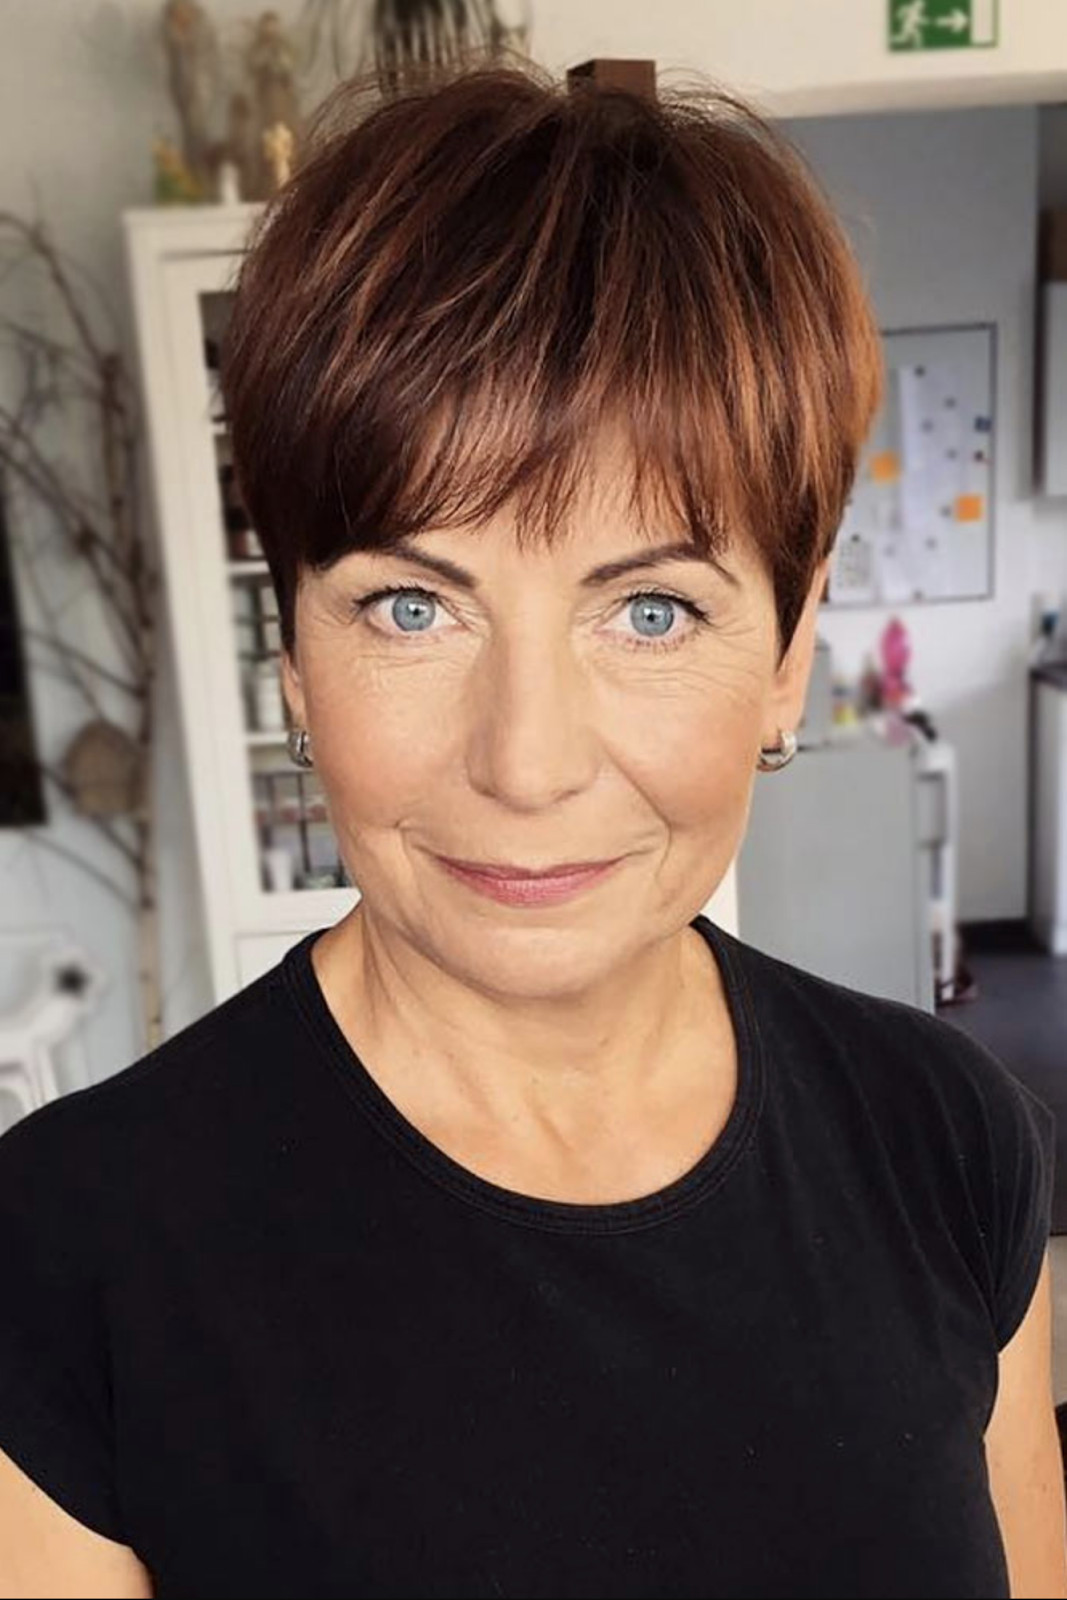 Short Women Hairstyles 2020
 2019 2020 Short Hairstyles for Women Over 50 That Are